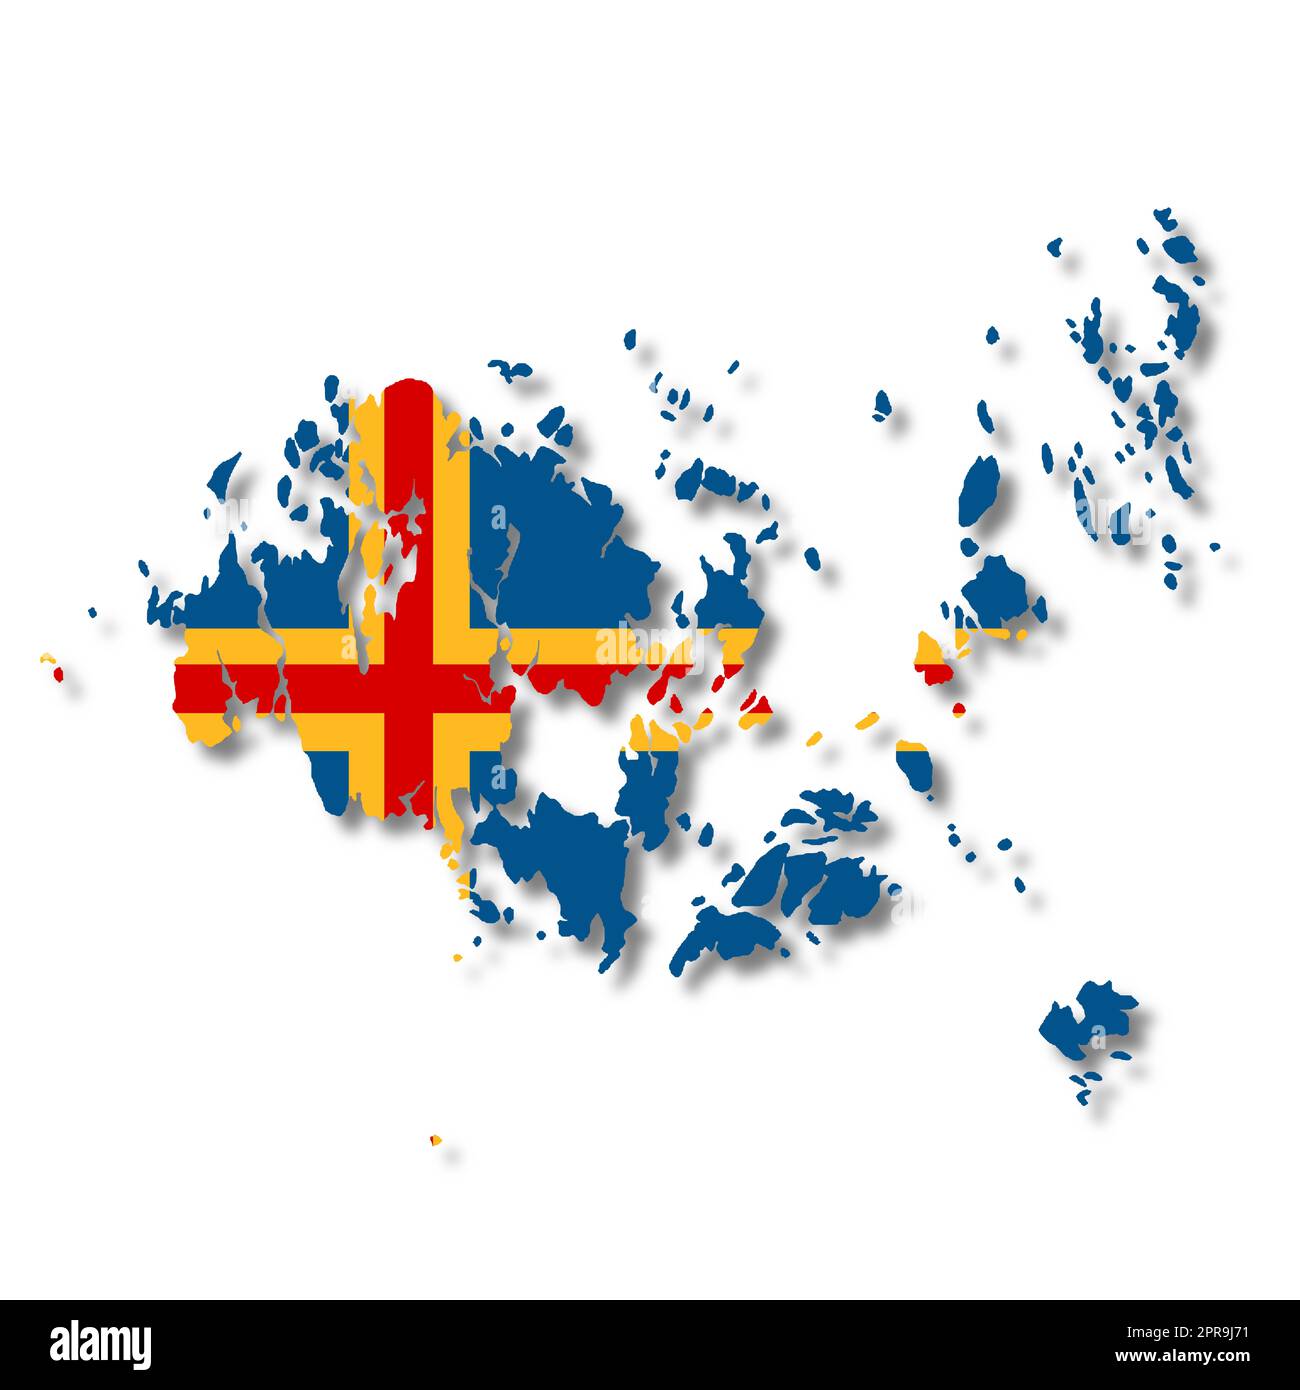 An Aland Islands flag map 3d illustration on white with clipping path Stock Photo